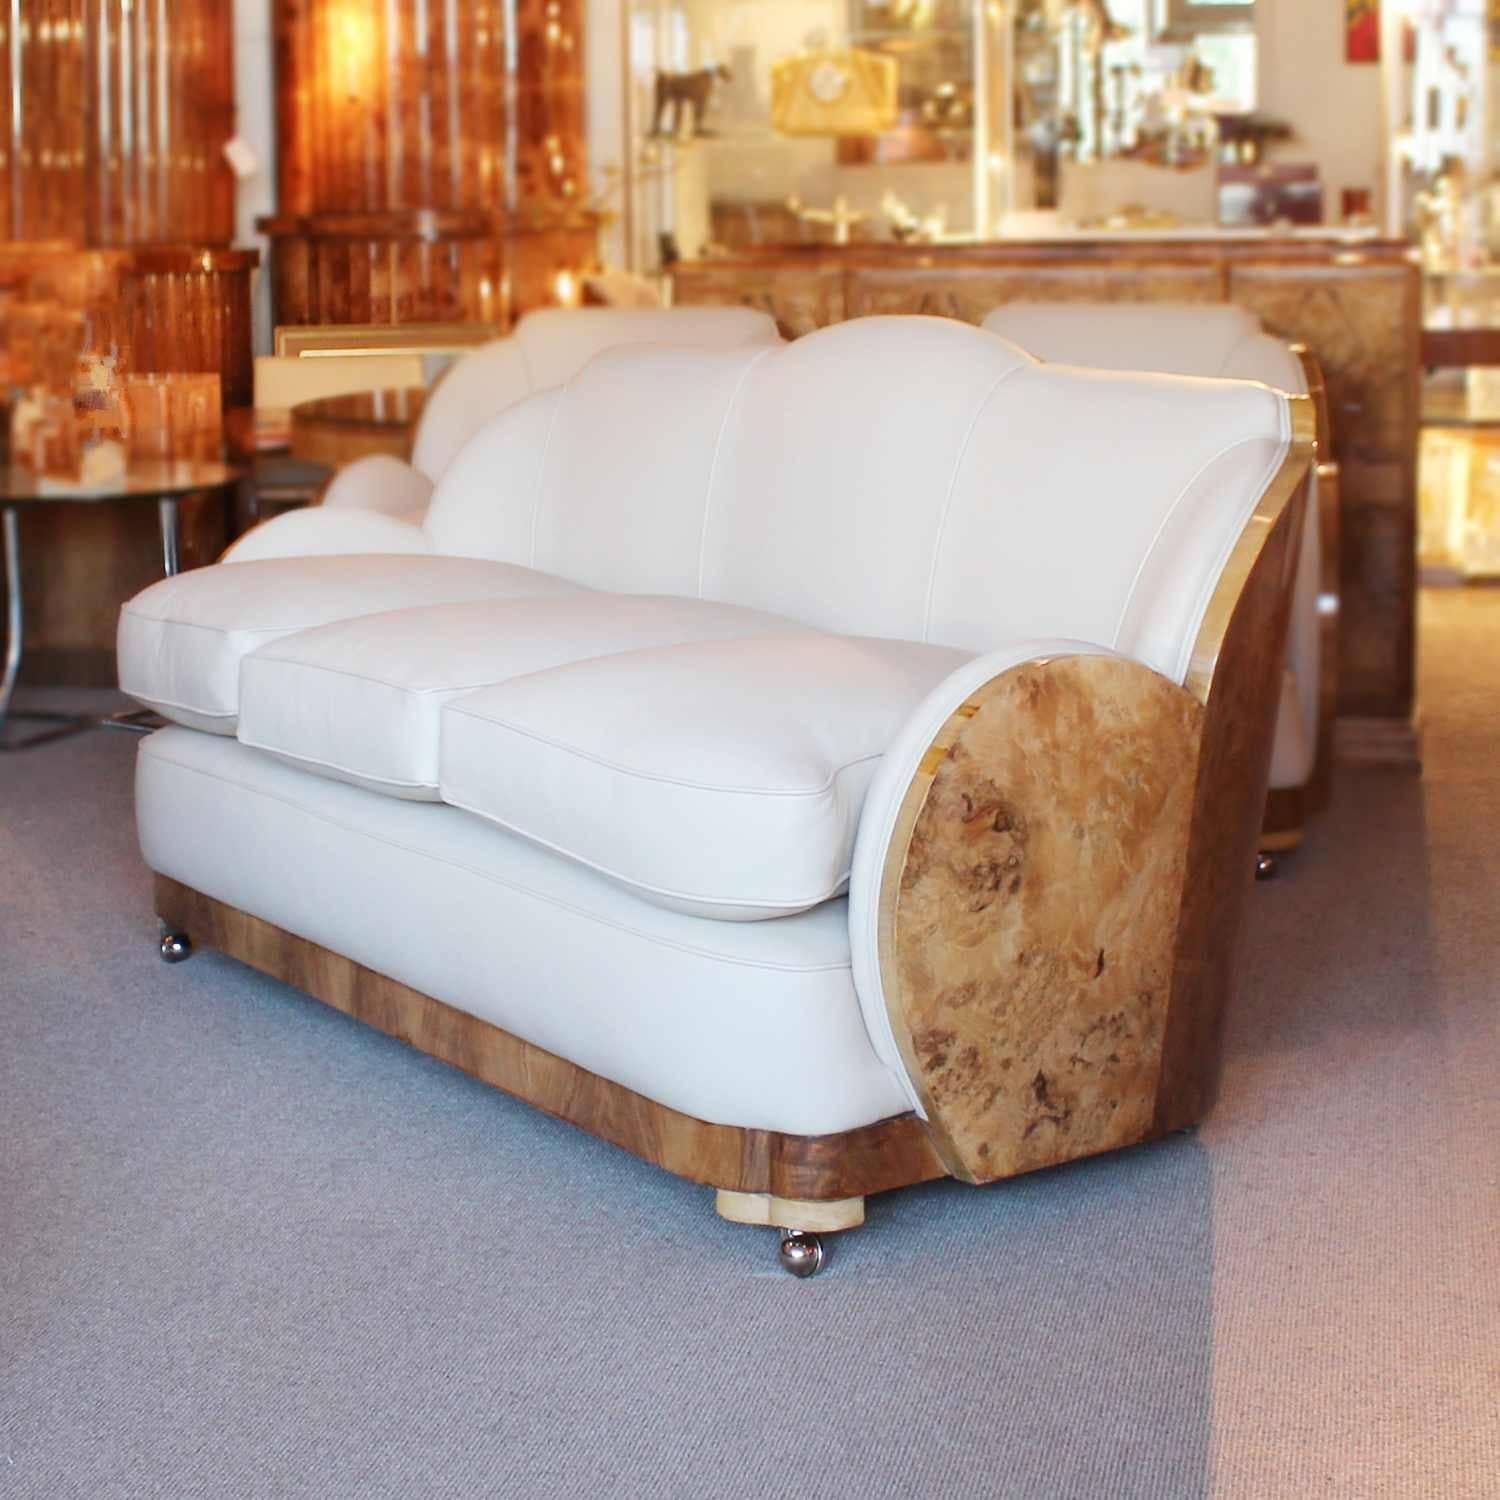 An Art Deco cloud suite by Harry & Lou Epstein. Three-seat cloud back sofa and two armchairs, with contrasting burr and straight grain walnut wraps. Upholstered in cream leather.

Dimensions: Sofa H 89cm, W 172cm, D 95cm, seat H 51cm, seat D 67cm